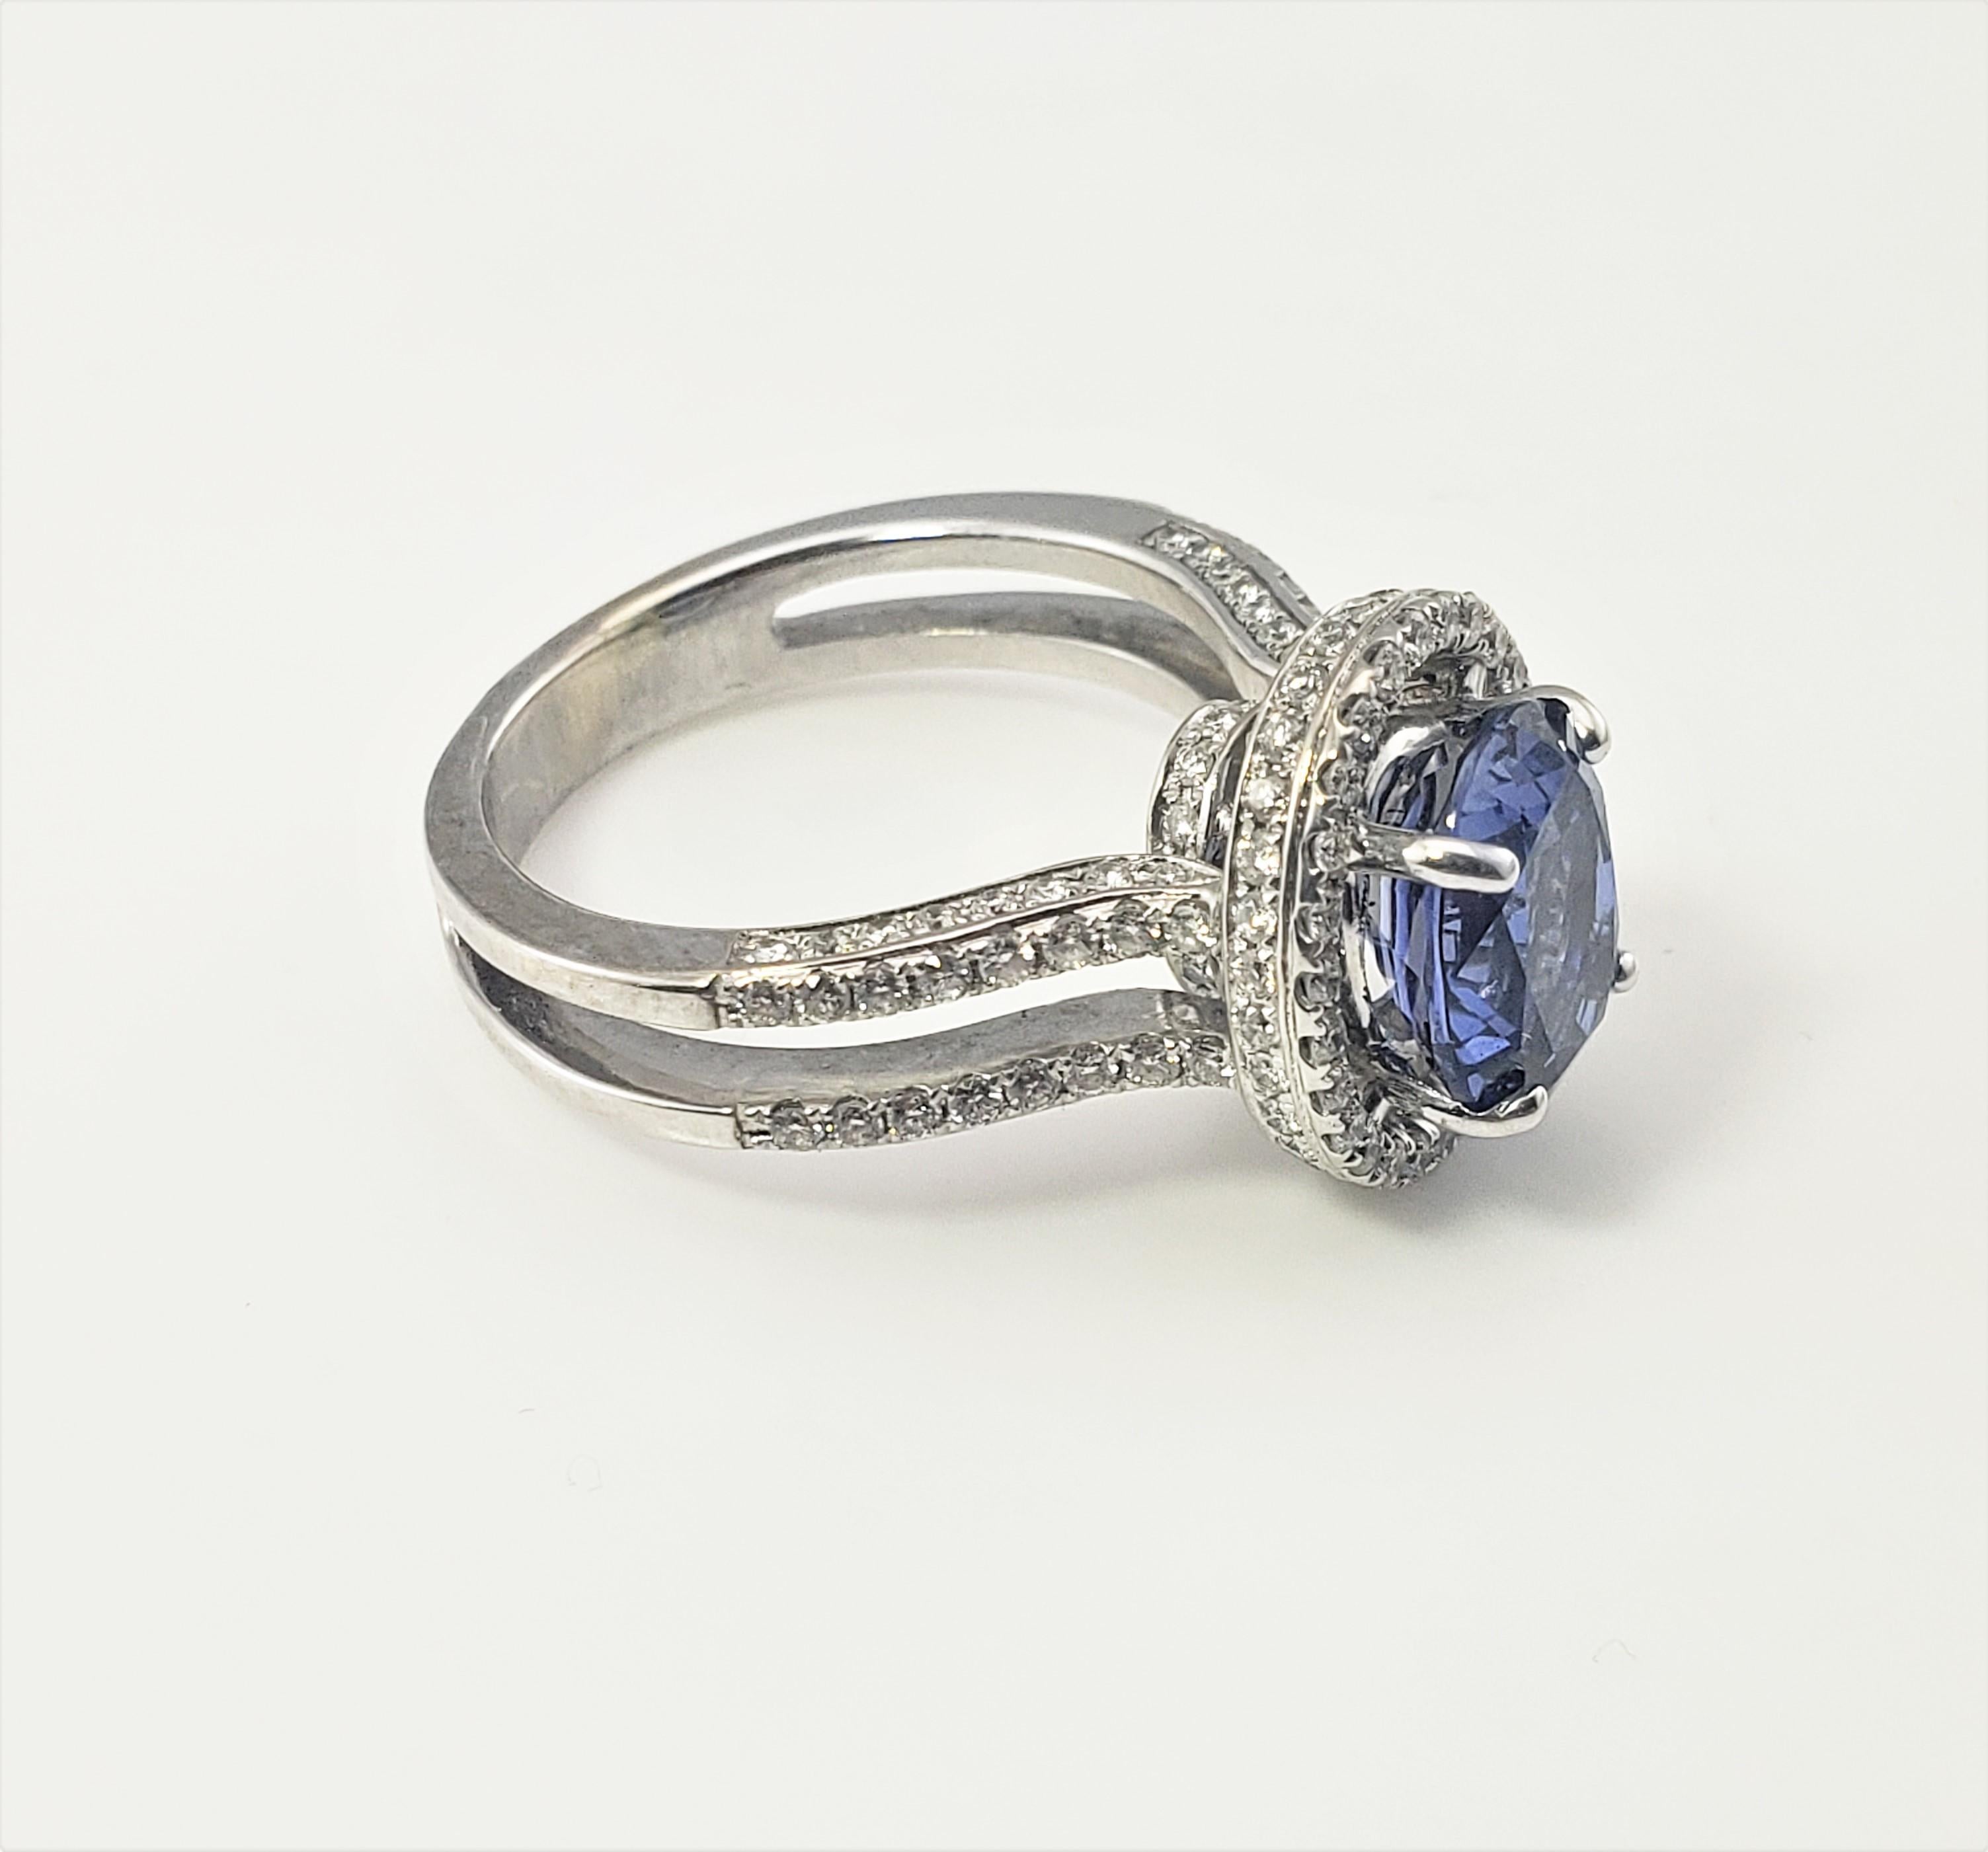 18 Karat White Gold Tanzanite and Diamond Ring Size 7.5 GAI Certified-

This stunning ring features one oval tanzanite (11 mm x 8 mm) surrounded by 149 round brilliant cut diamonds set in classic 18K white gold.  Top of ring measures 15 mm x 13 mm. 